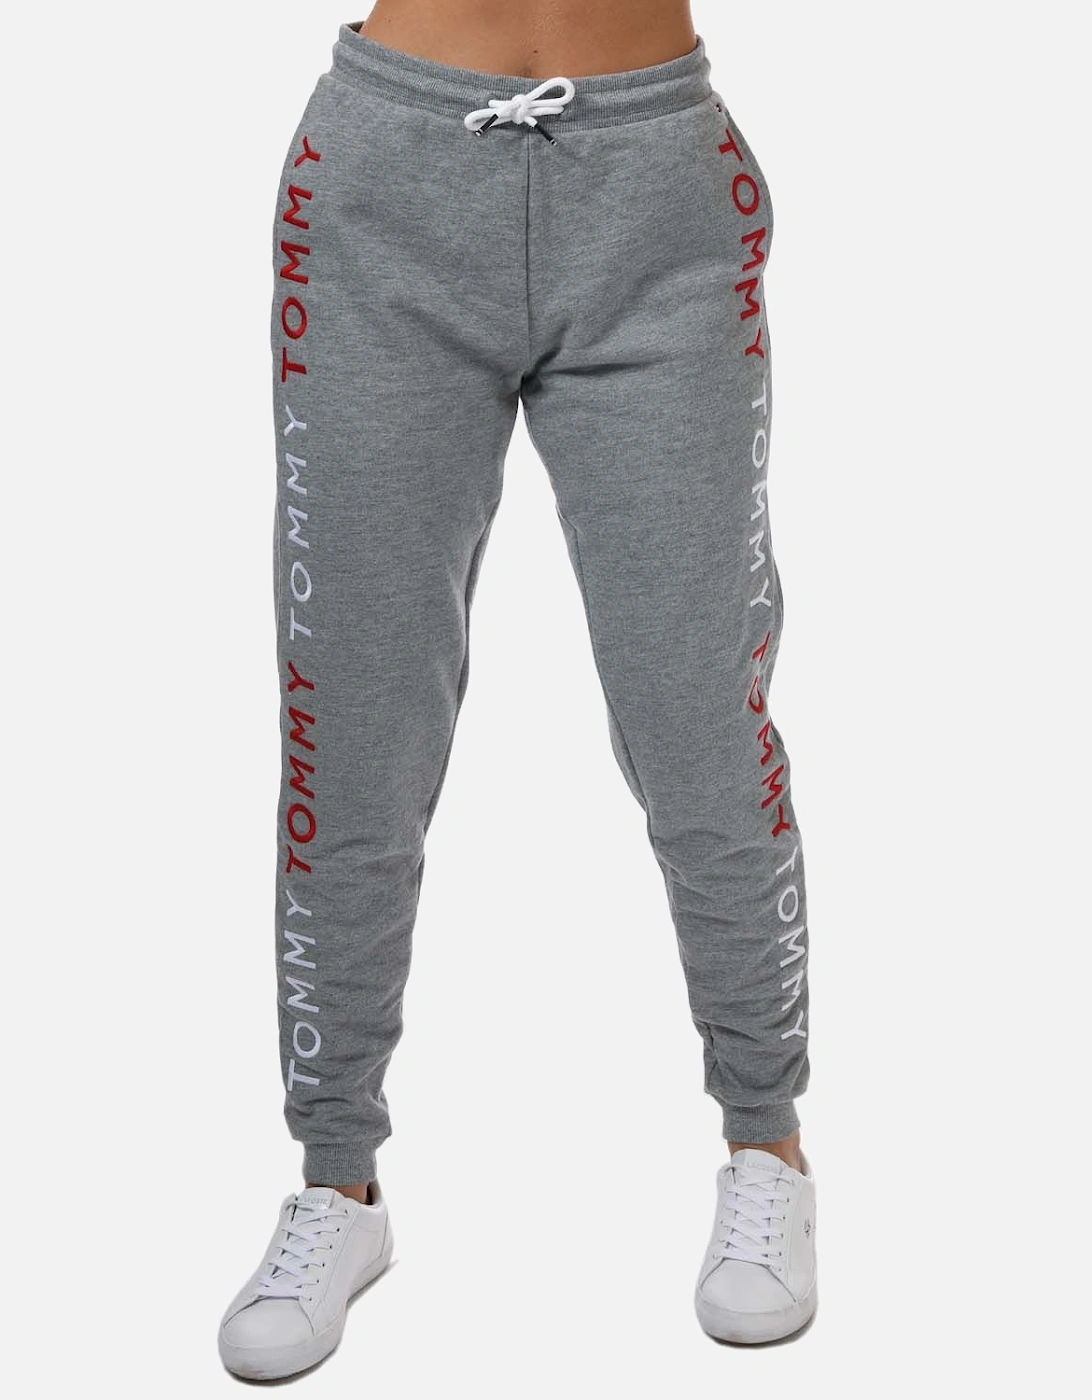 Women's Womens Logo Embroidery Tapered Joggers - Grey/Grey Heather